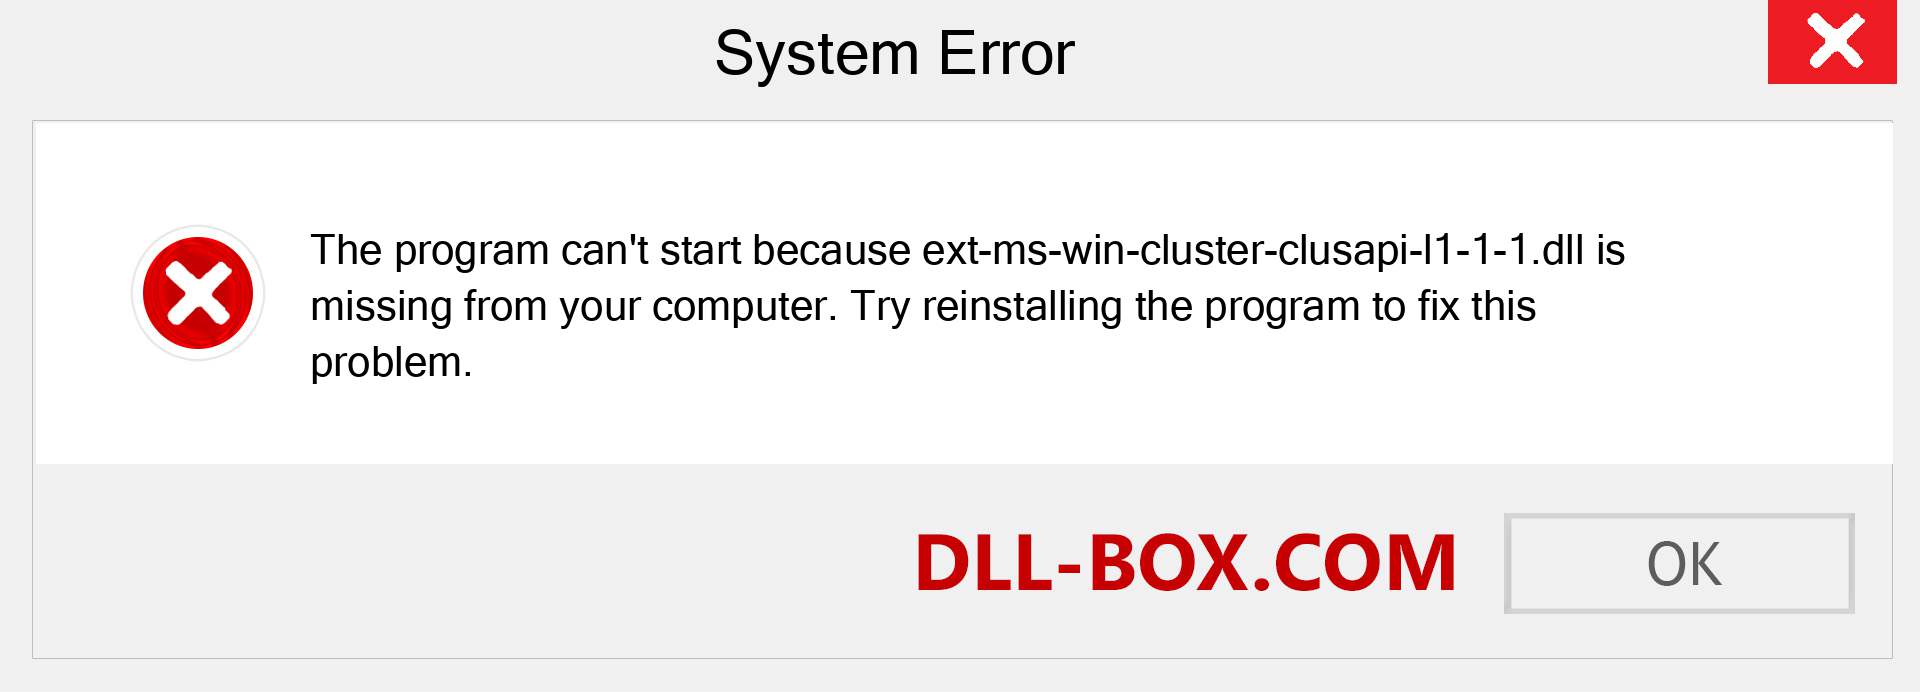  ext-ms-win-cluster-clusapi-l1-1-1.dll file is missing?. Download for Windows 7, 8, 10 - Fix  ext-ms-win-cluster-clusapi-l1-1-1 dll Missing Error on Windows, photos, images